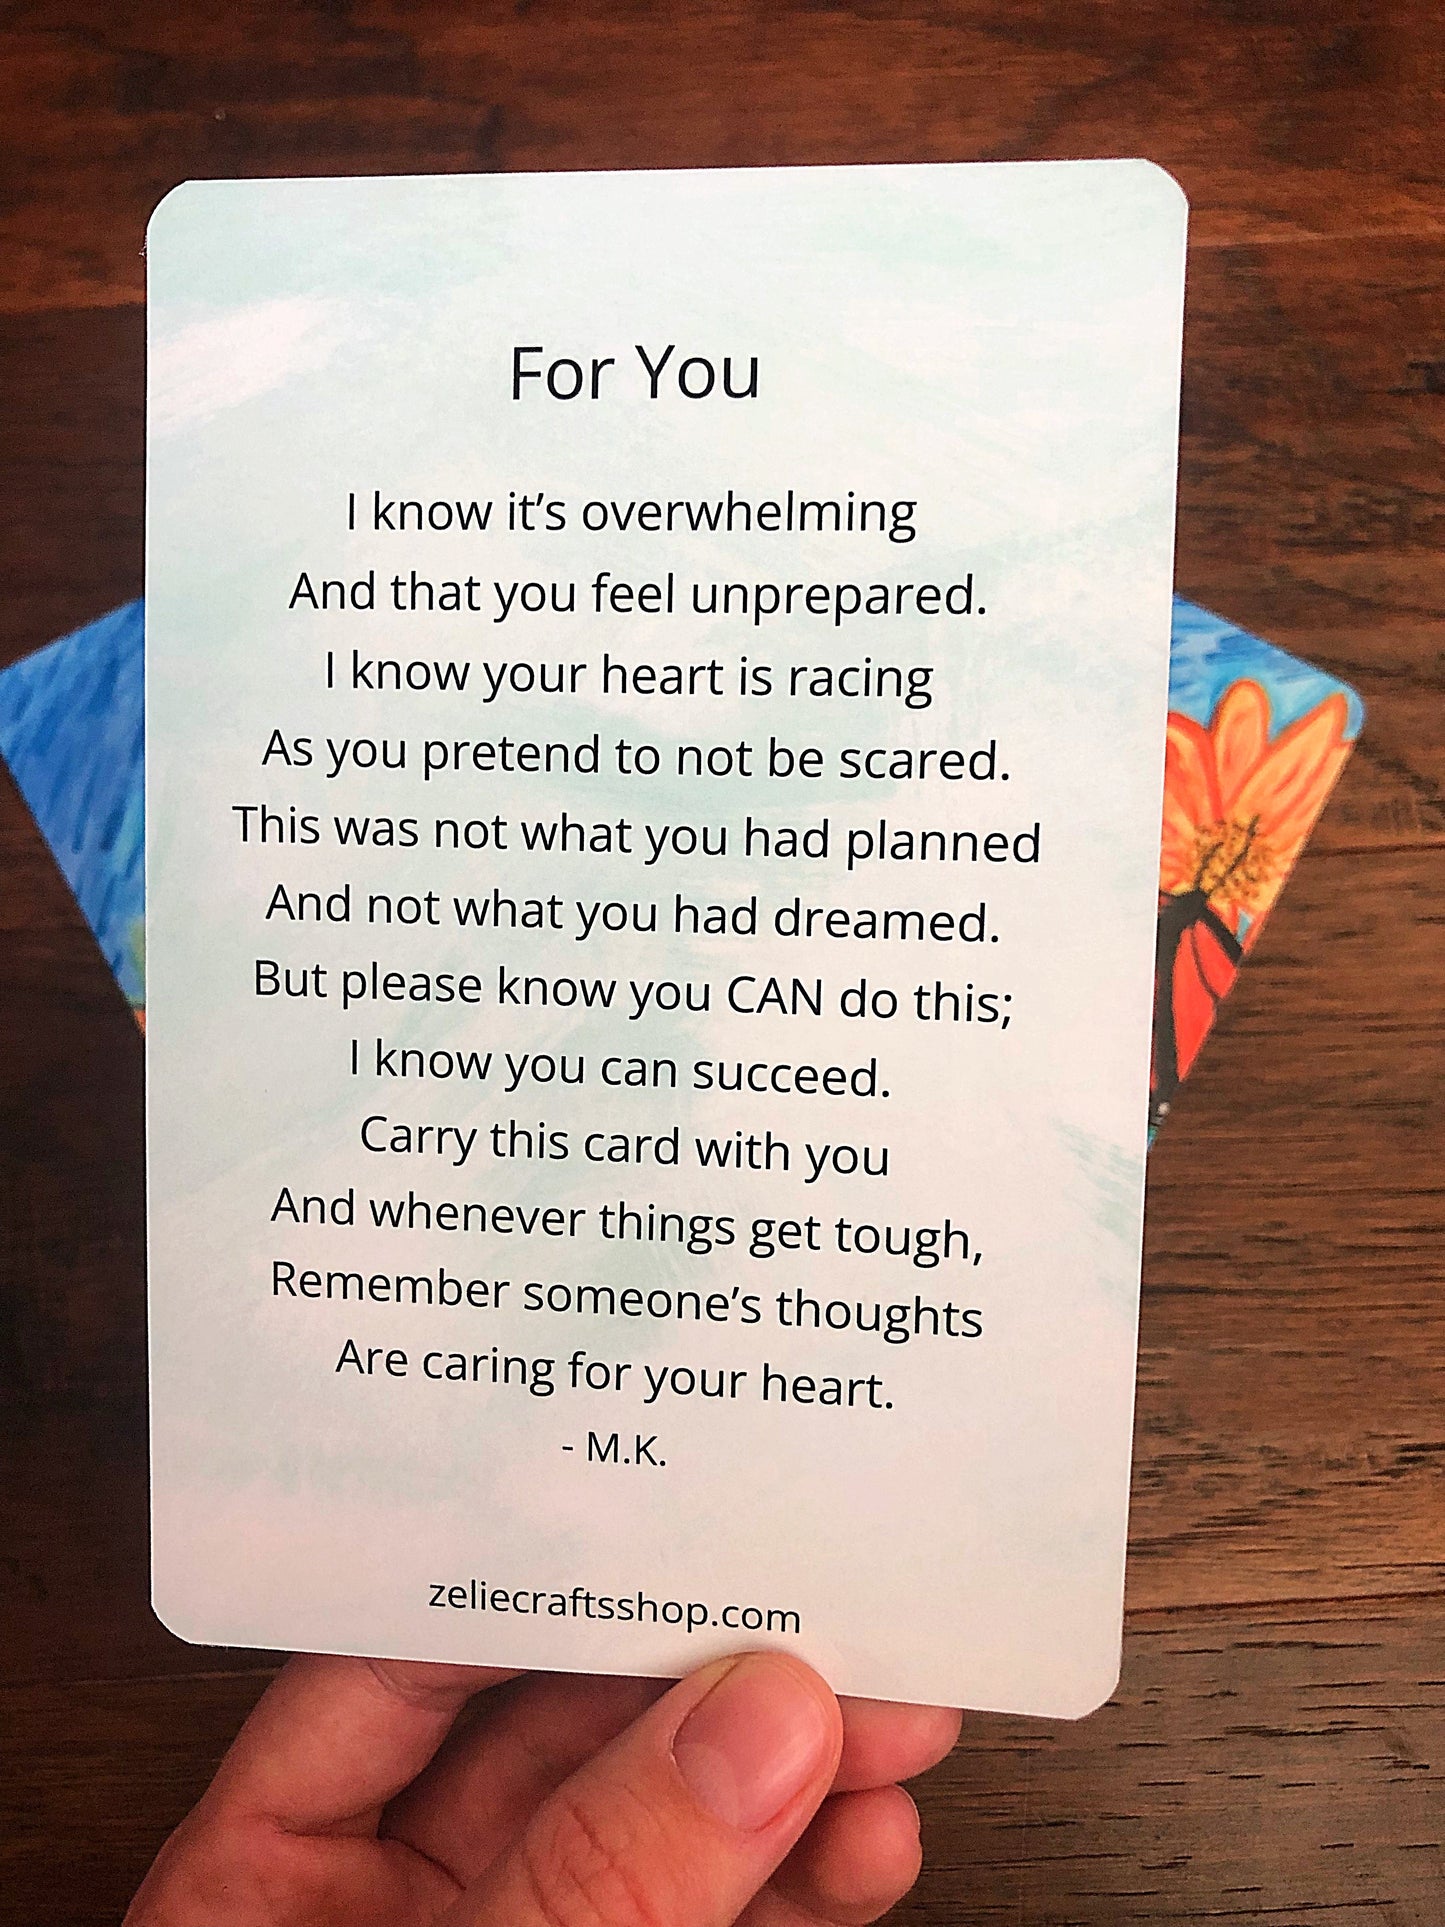 Pro-life prayer card - Card for Unplanned Pregnancies